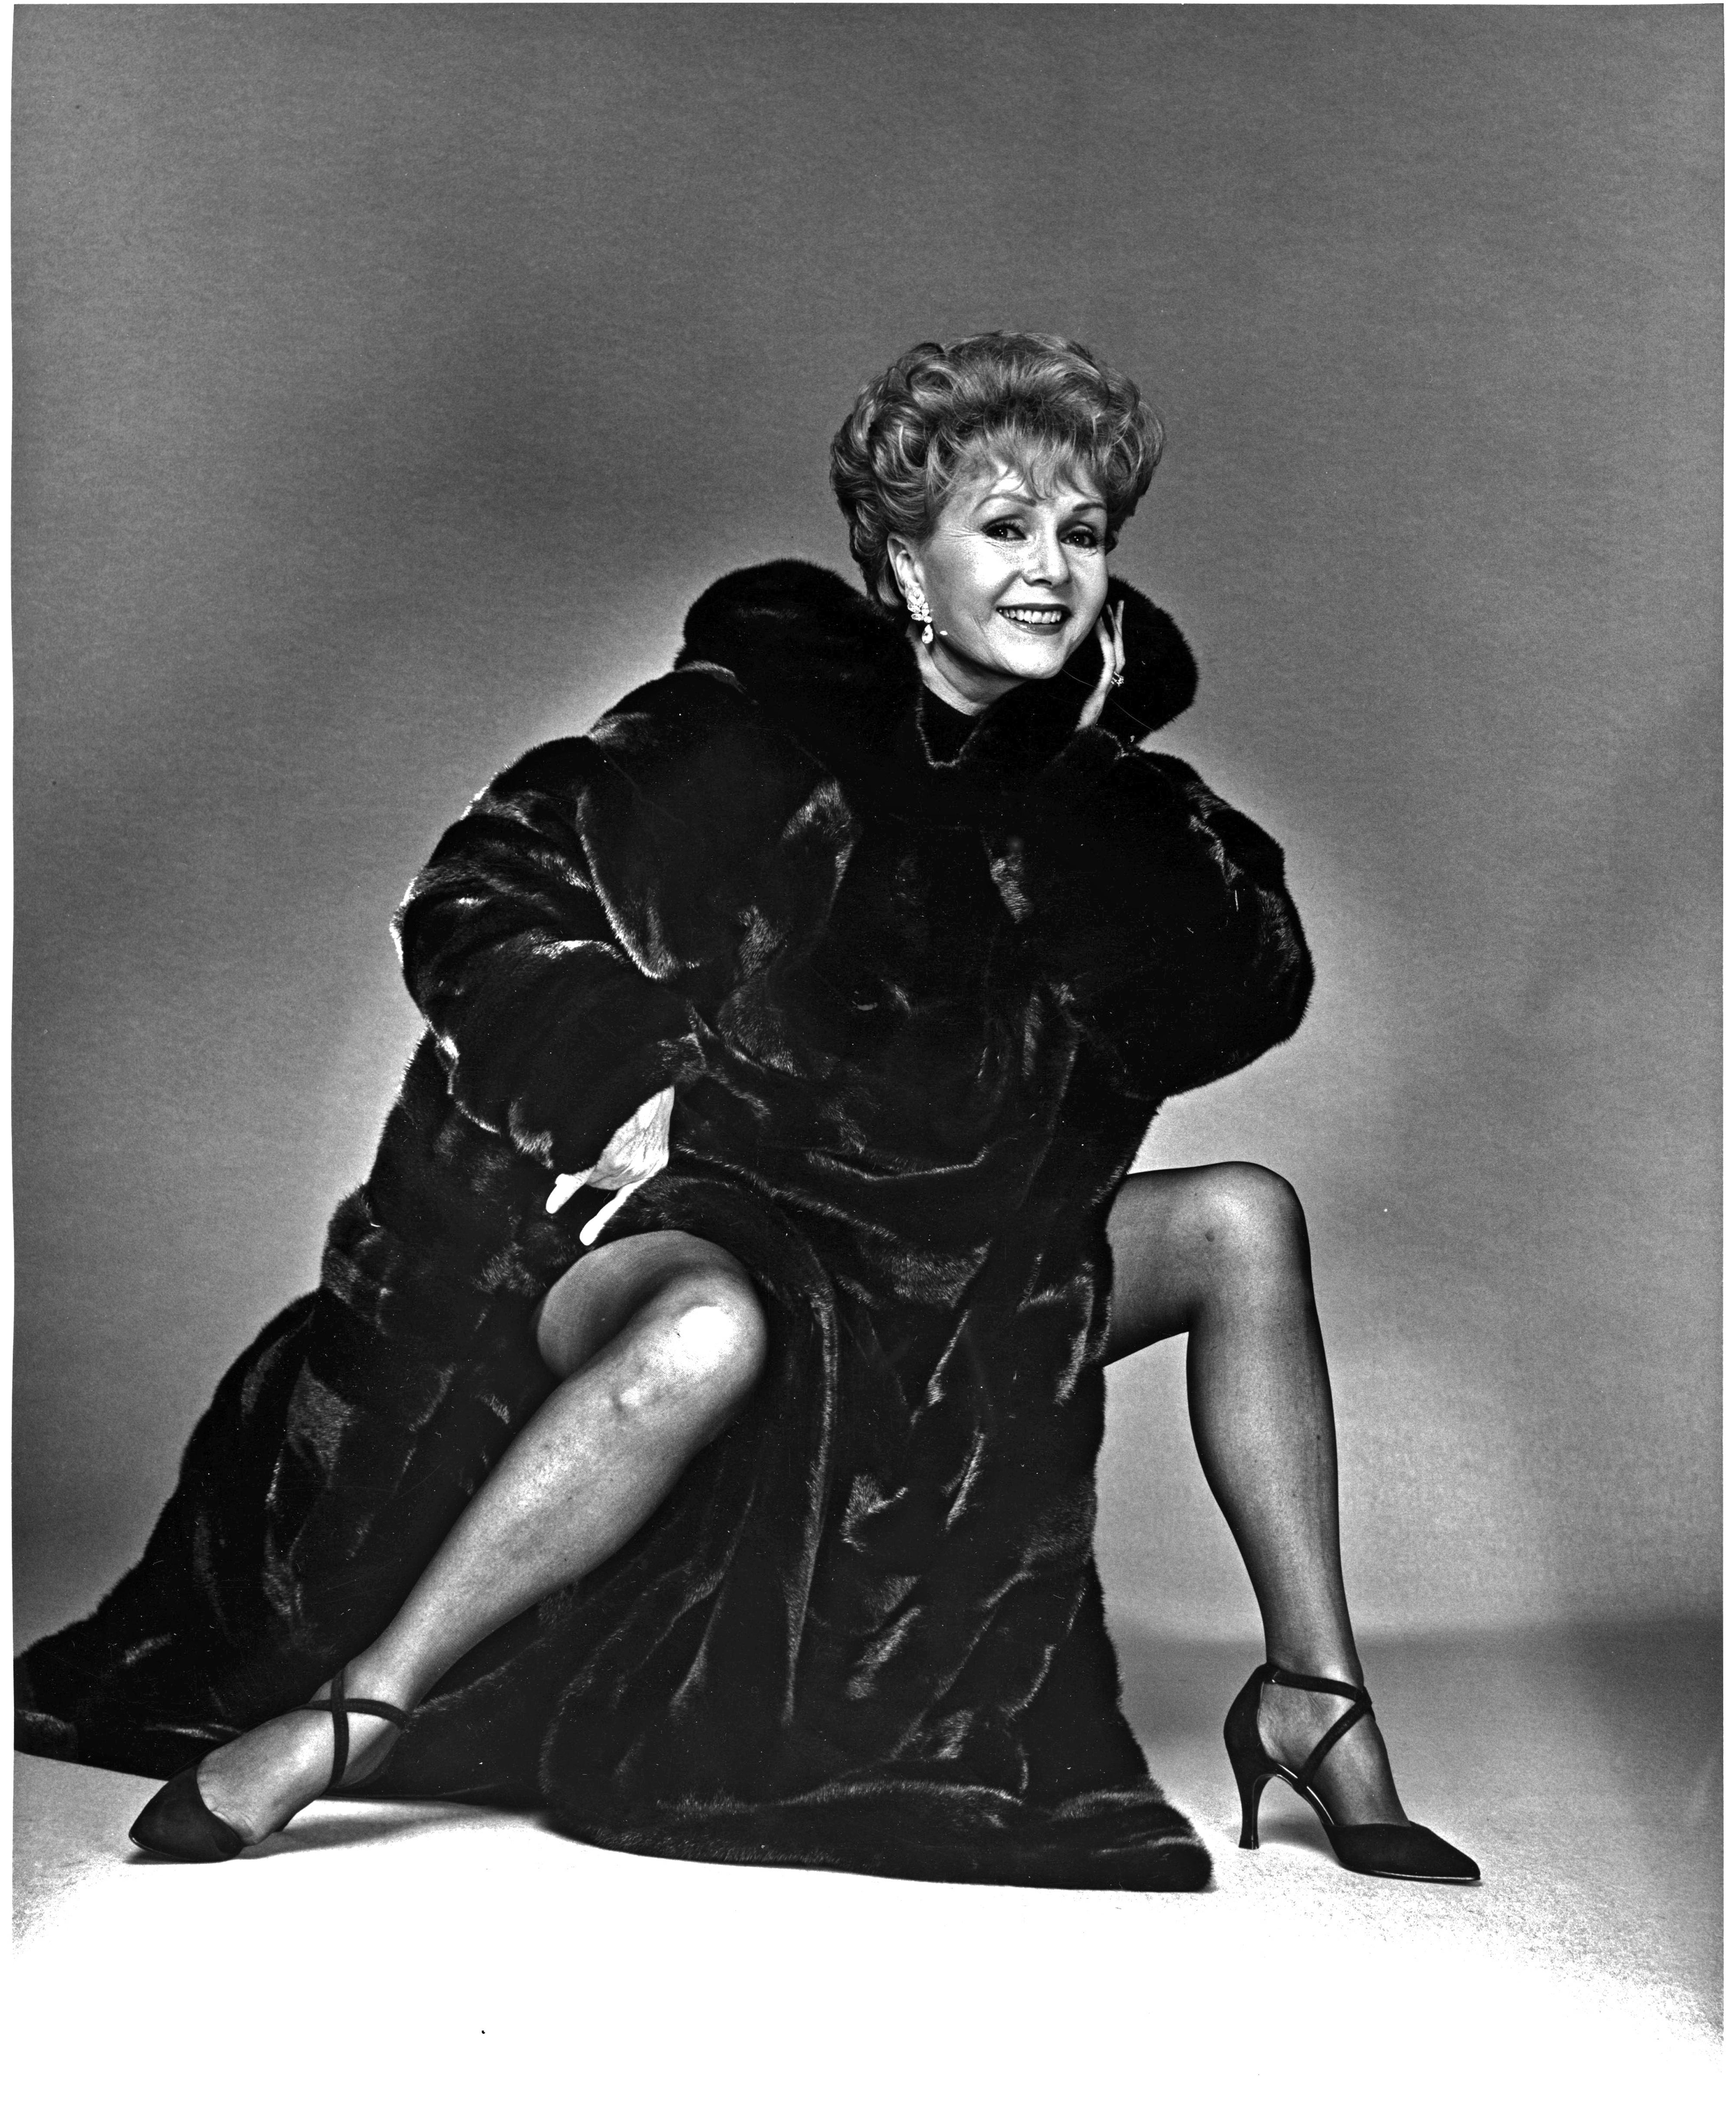 Jack Mitchell Black and White Photograph - Actress Debbie Reynolds 'What Becomes A Legend Most?' Blackglama session photo